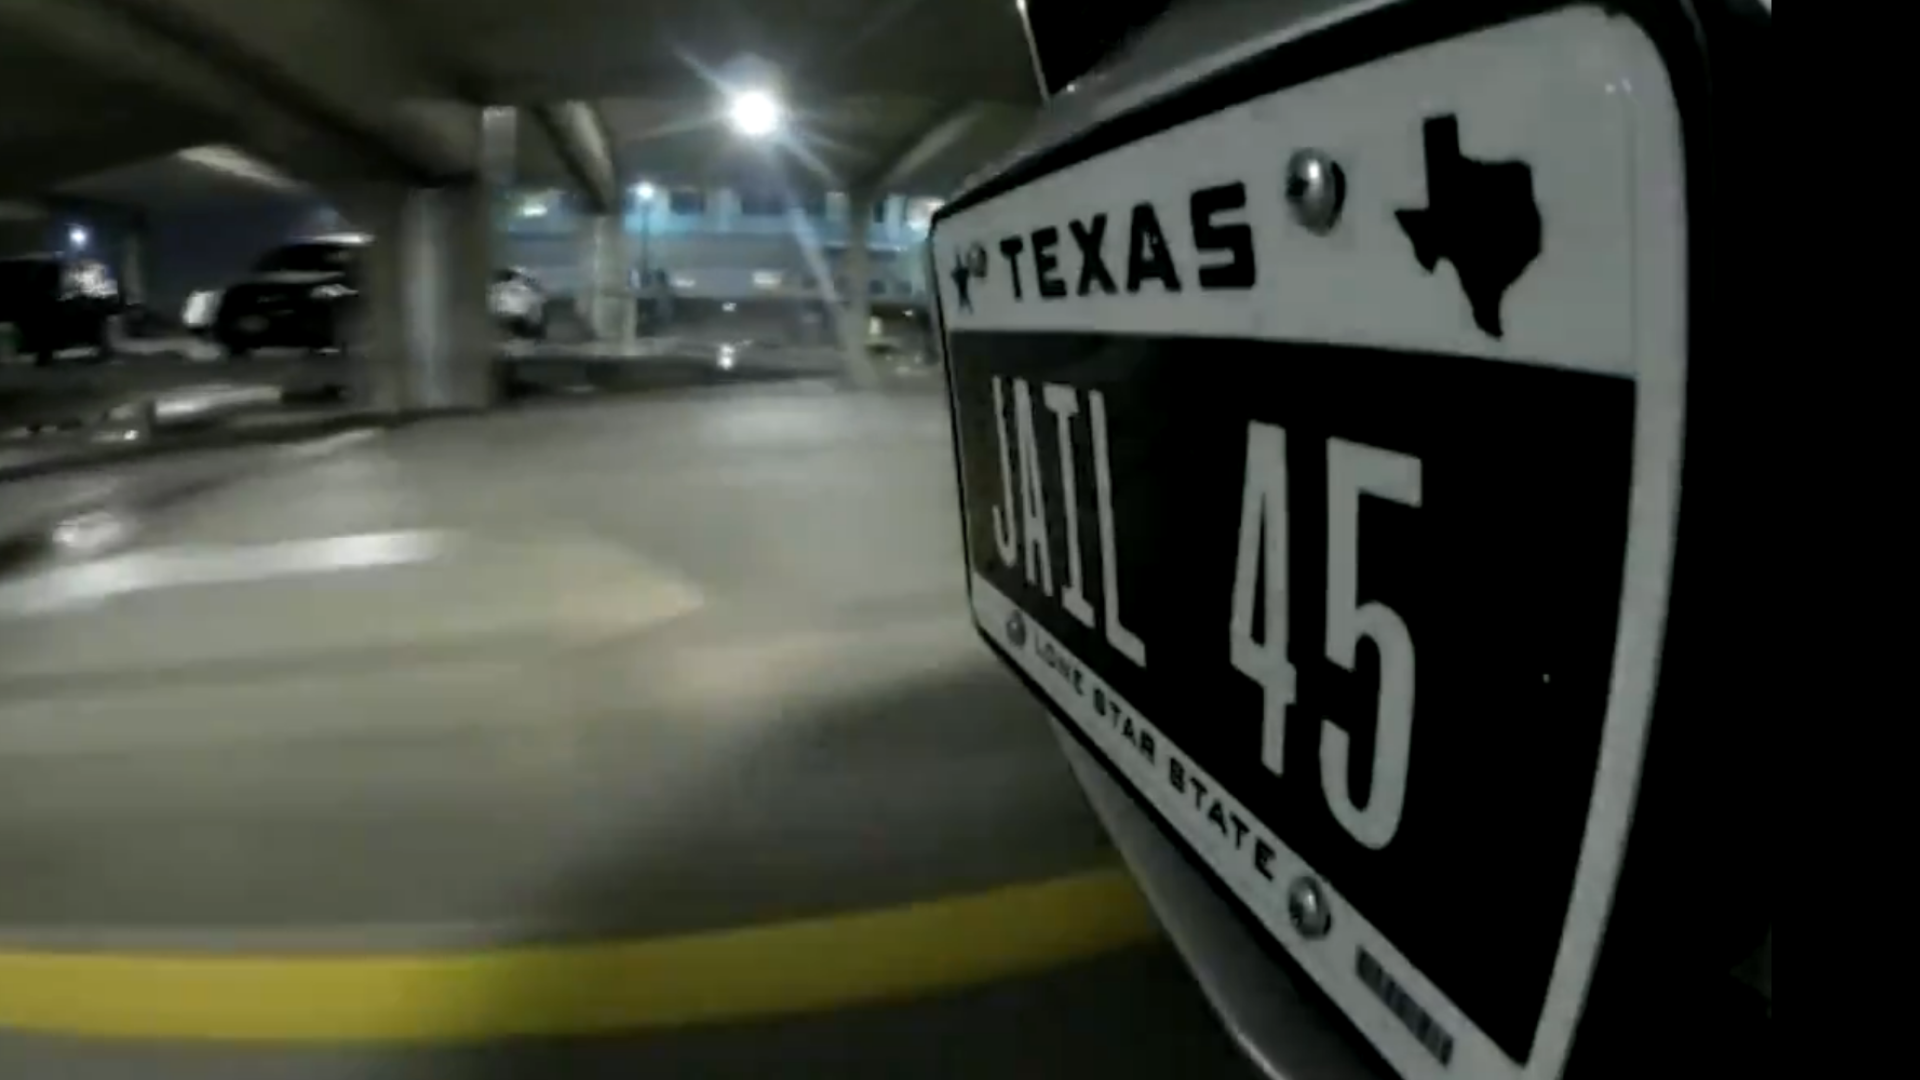 The Texas Department of Motor Vehicles is forcing a Fort Worth man to get rid of his “Jail 45” license plate after initially approving it.